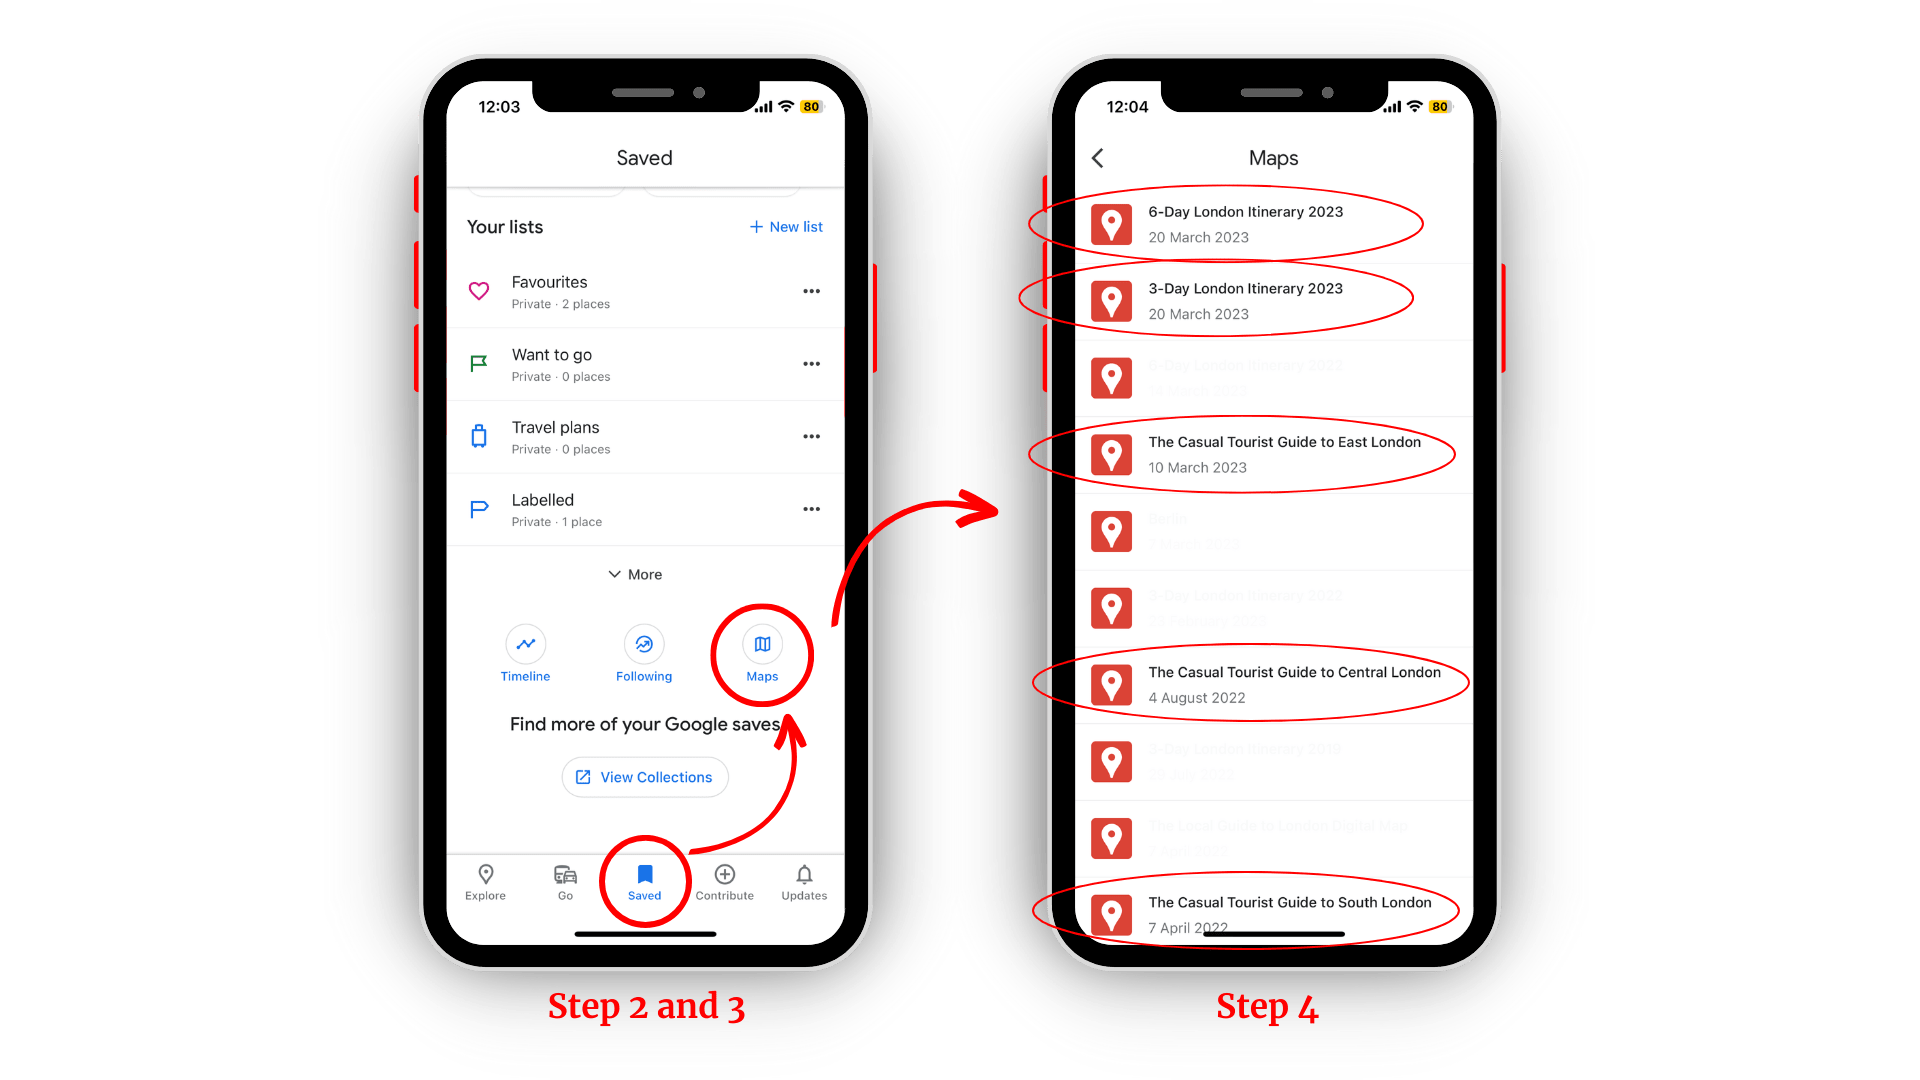 Two phones are pictured side by side to exemplify steps 2, 3 and 4, as listed above, to access the digital map.